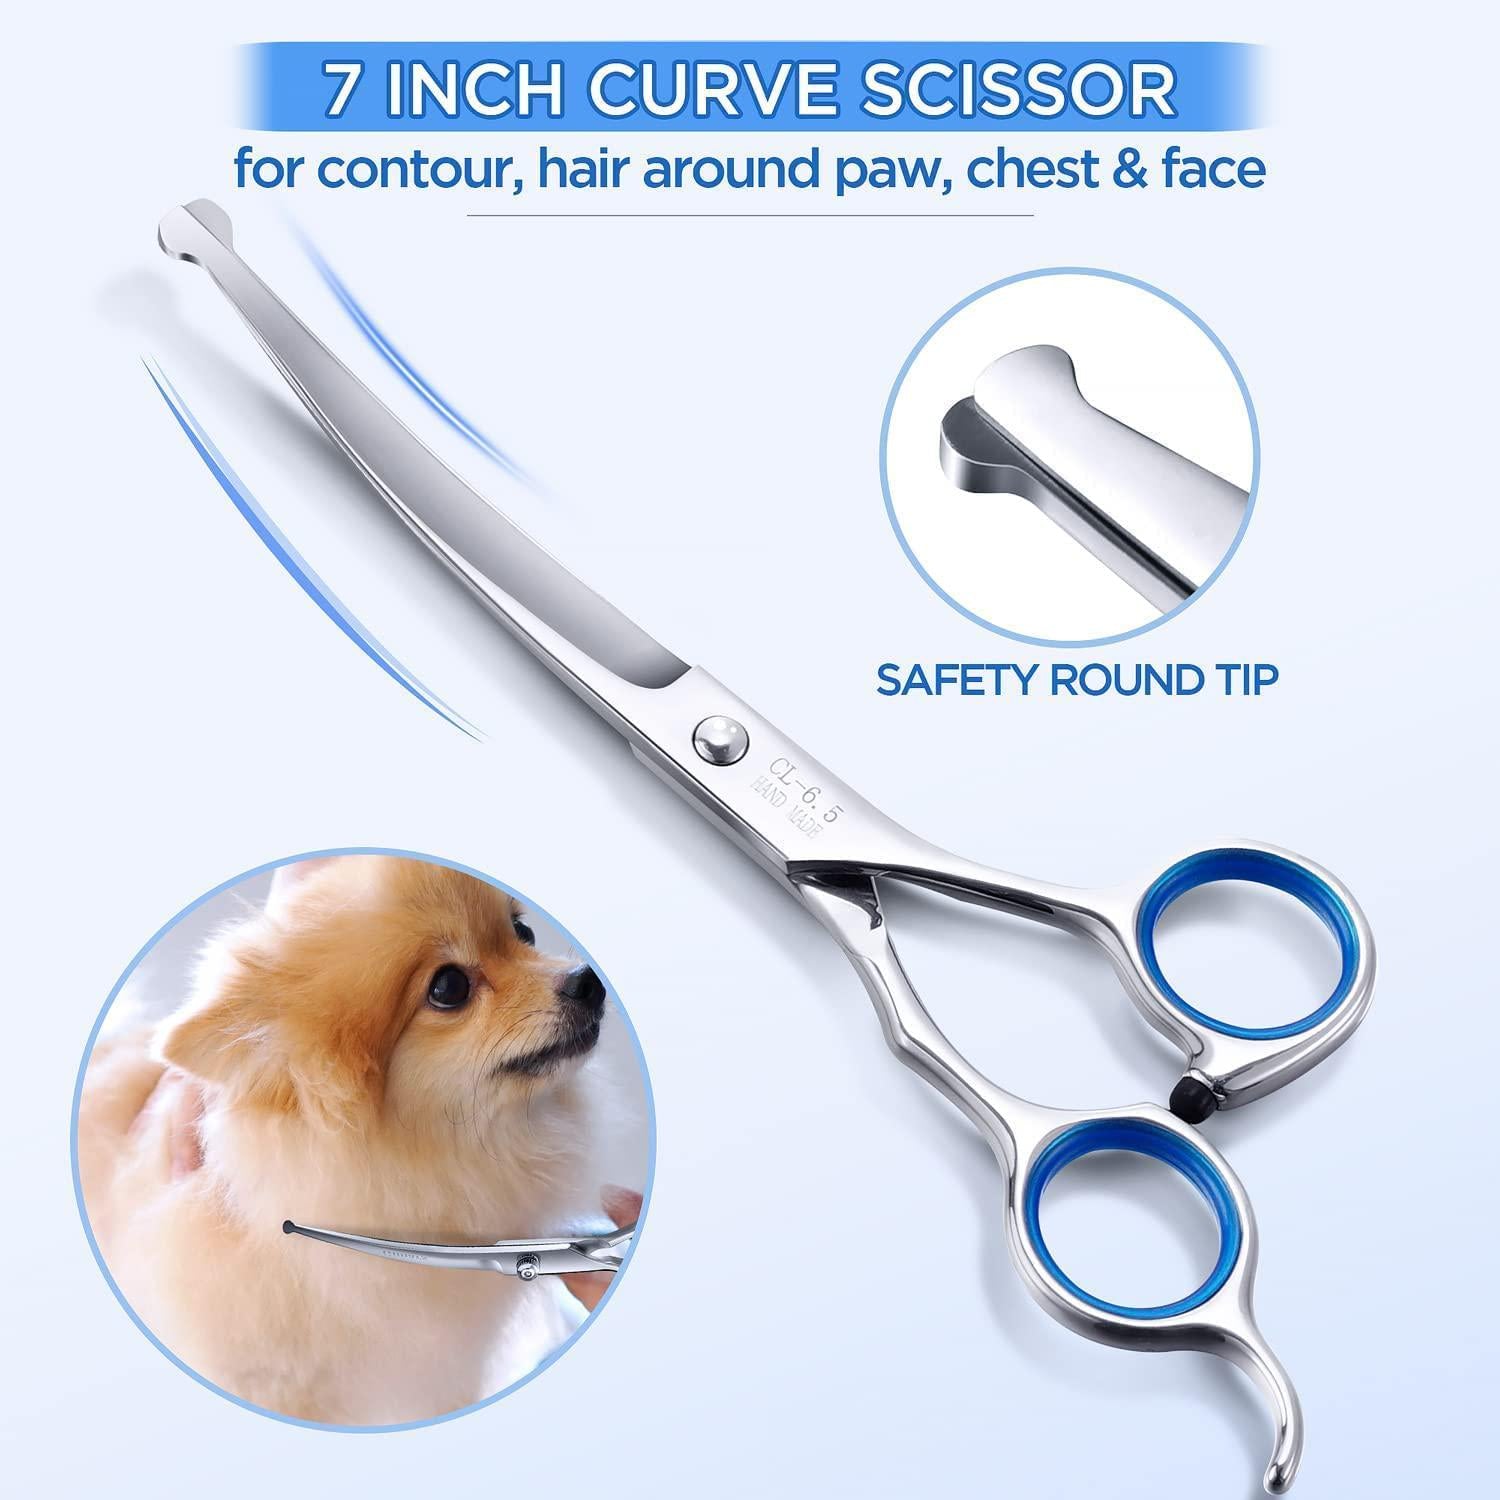 Gimars, Gimars Titanium Coated 3CR Stainless Steel Dog Grooming Scissors Kit, Heavy Duty Pet Grooming Trimmer Kit - Thinning, Straight, Curved Shears with Comb for Long and Short Hair, Fur for Cat and More Pets